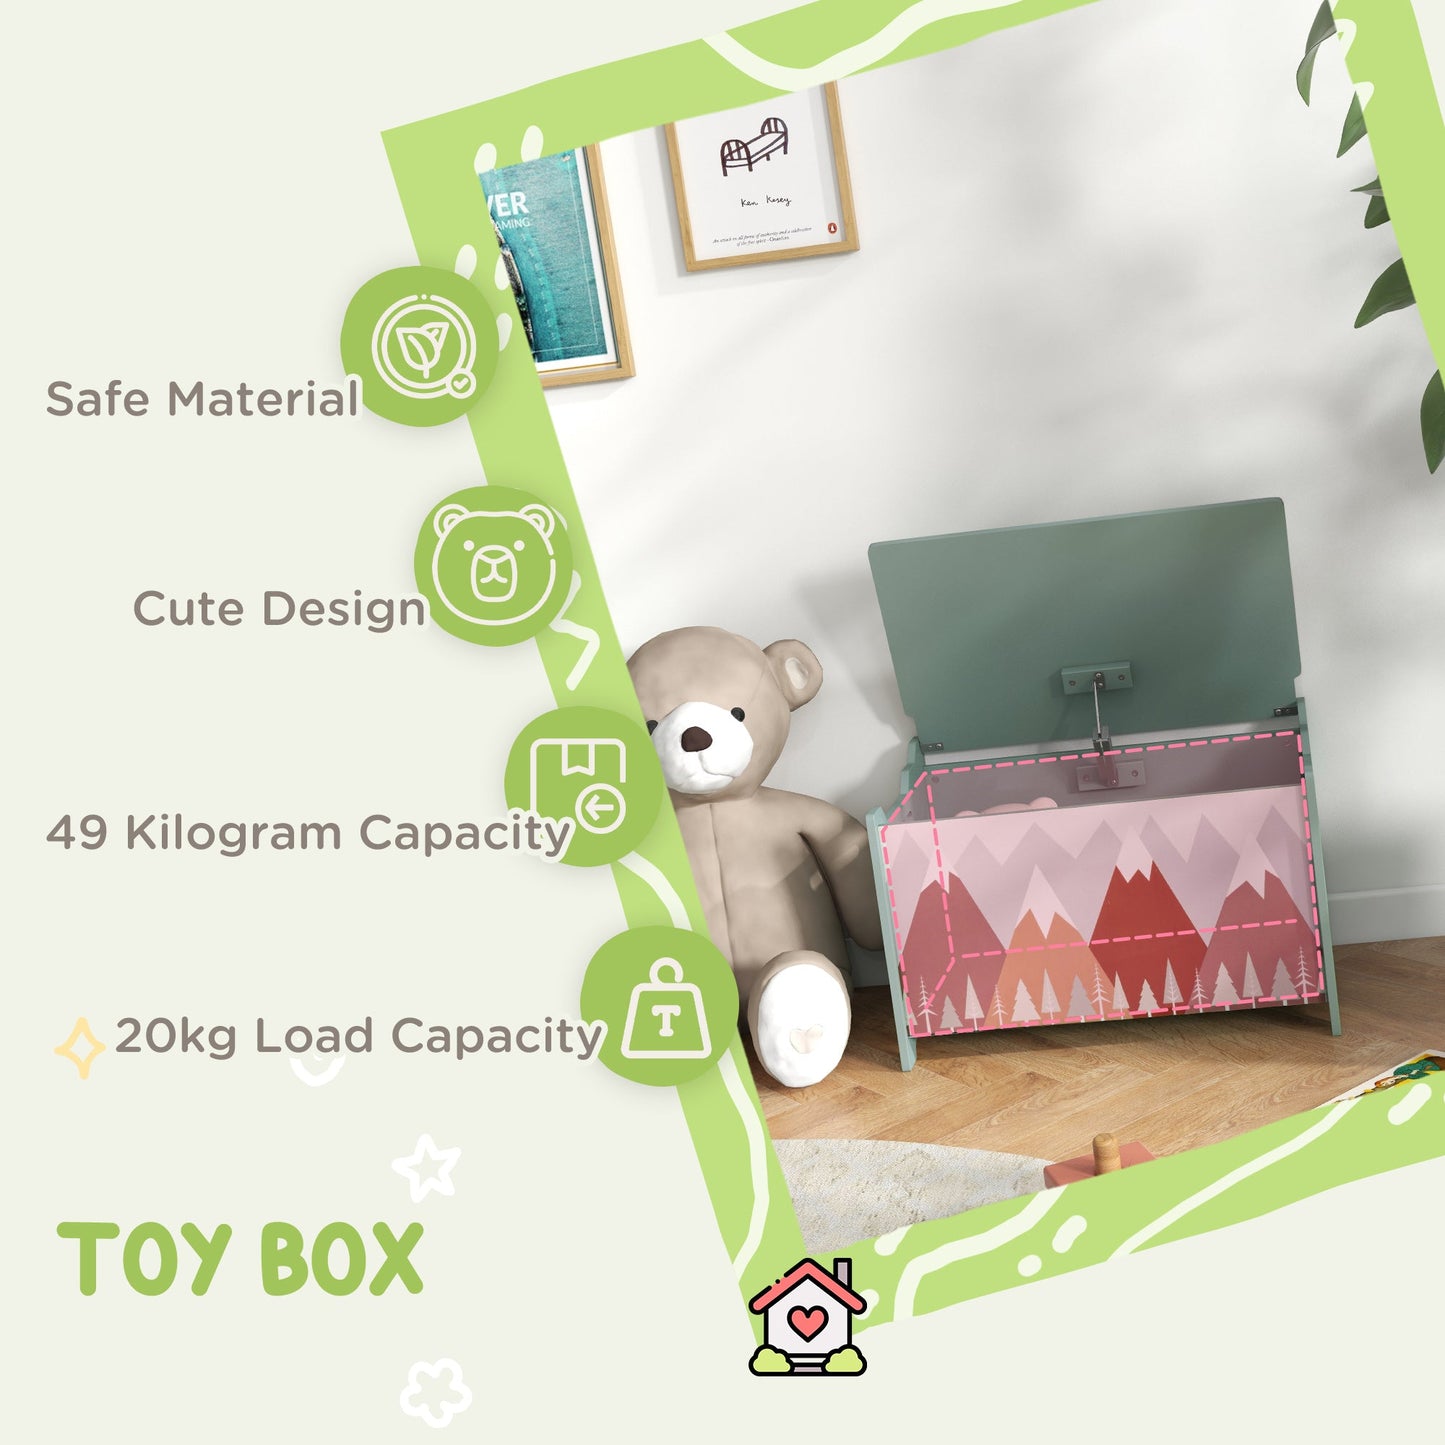 ZONEKIZ Toy Box for Girls Boys, Kids Toy Chest with Lid Safety Hinge, Cute Animal Design, Green